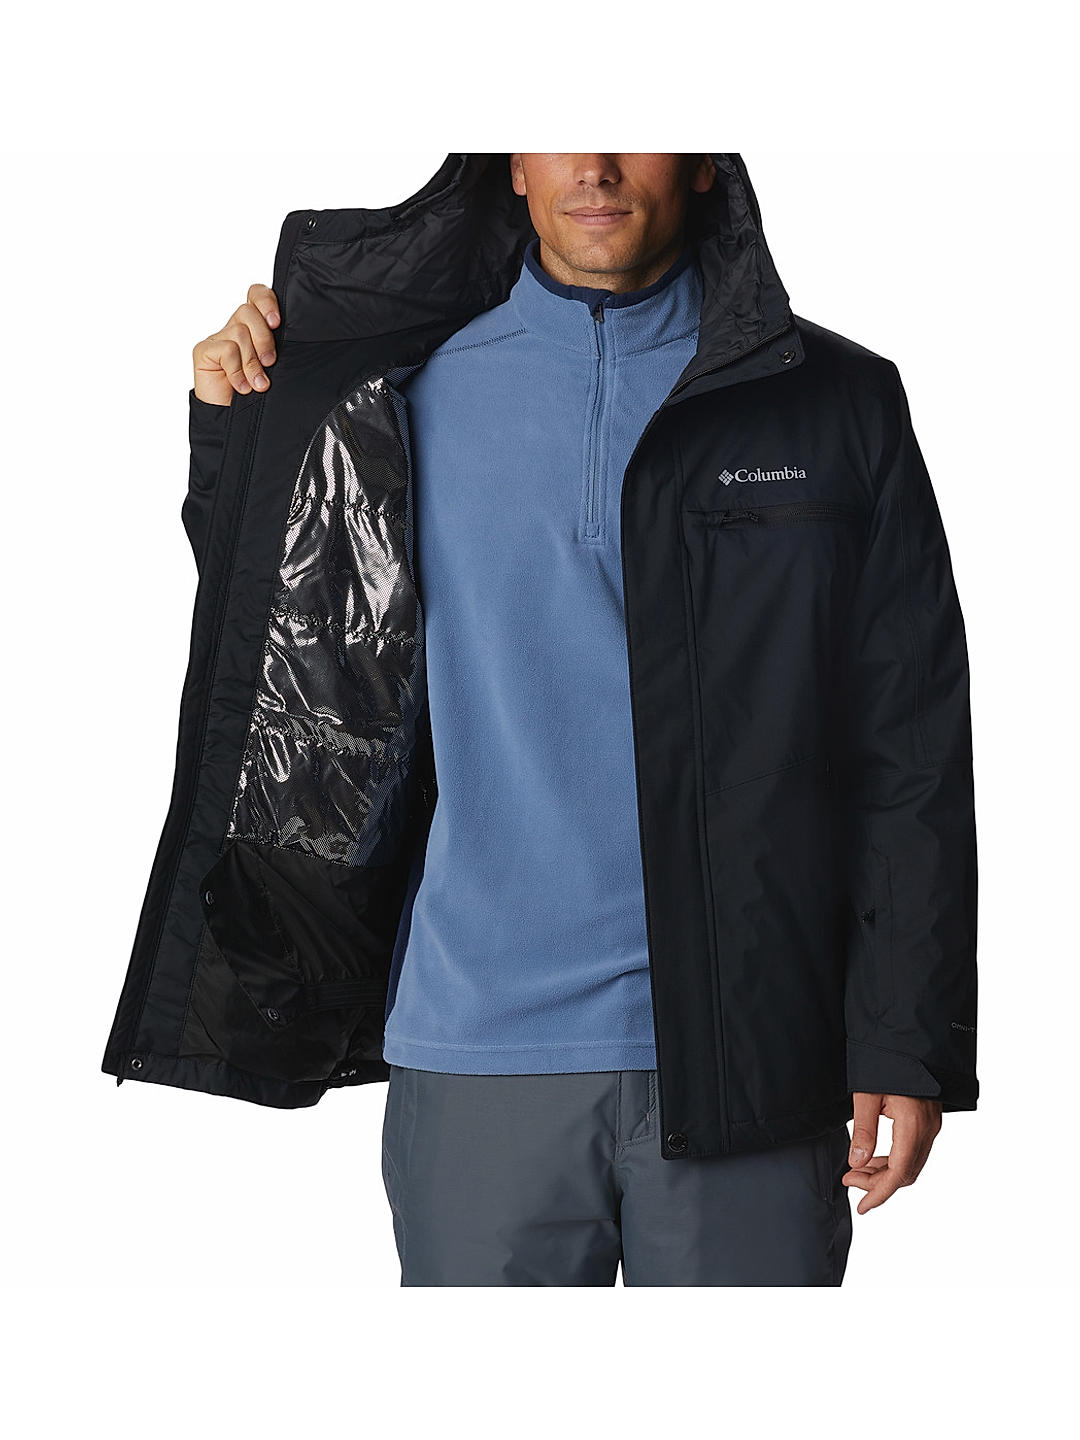 Buy Black Valley Point Jacket for Men Online at Columbia Sportswear ...